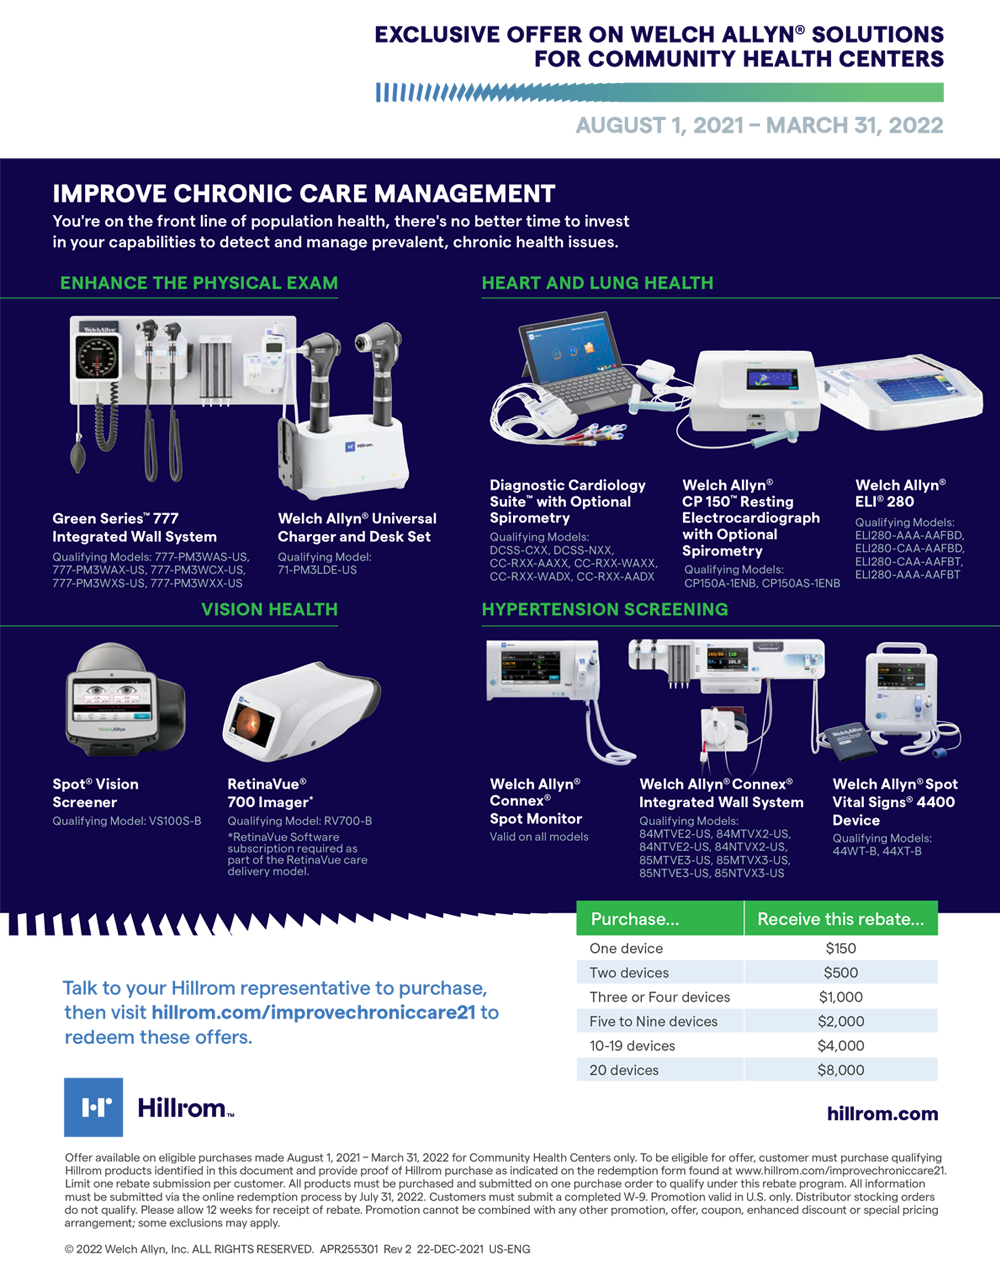 DOWNLOAD THIS EXCLUSIVE OFFER ON WELCH ALLYN SOLUTIONS FOR COMMUNITY HEALTH CENTERS